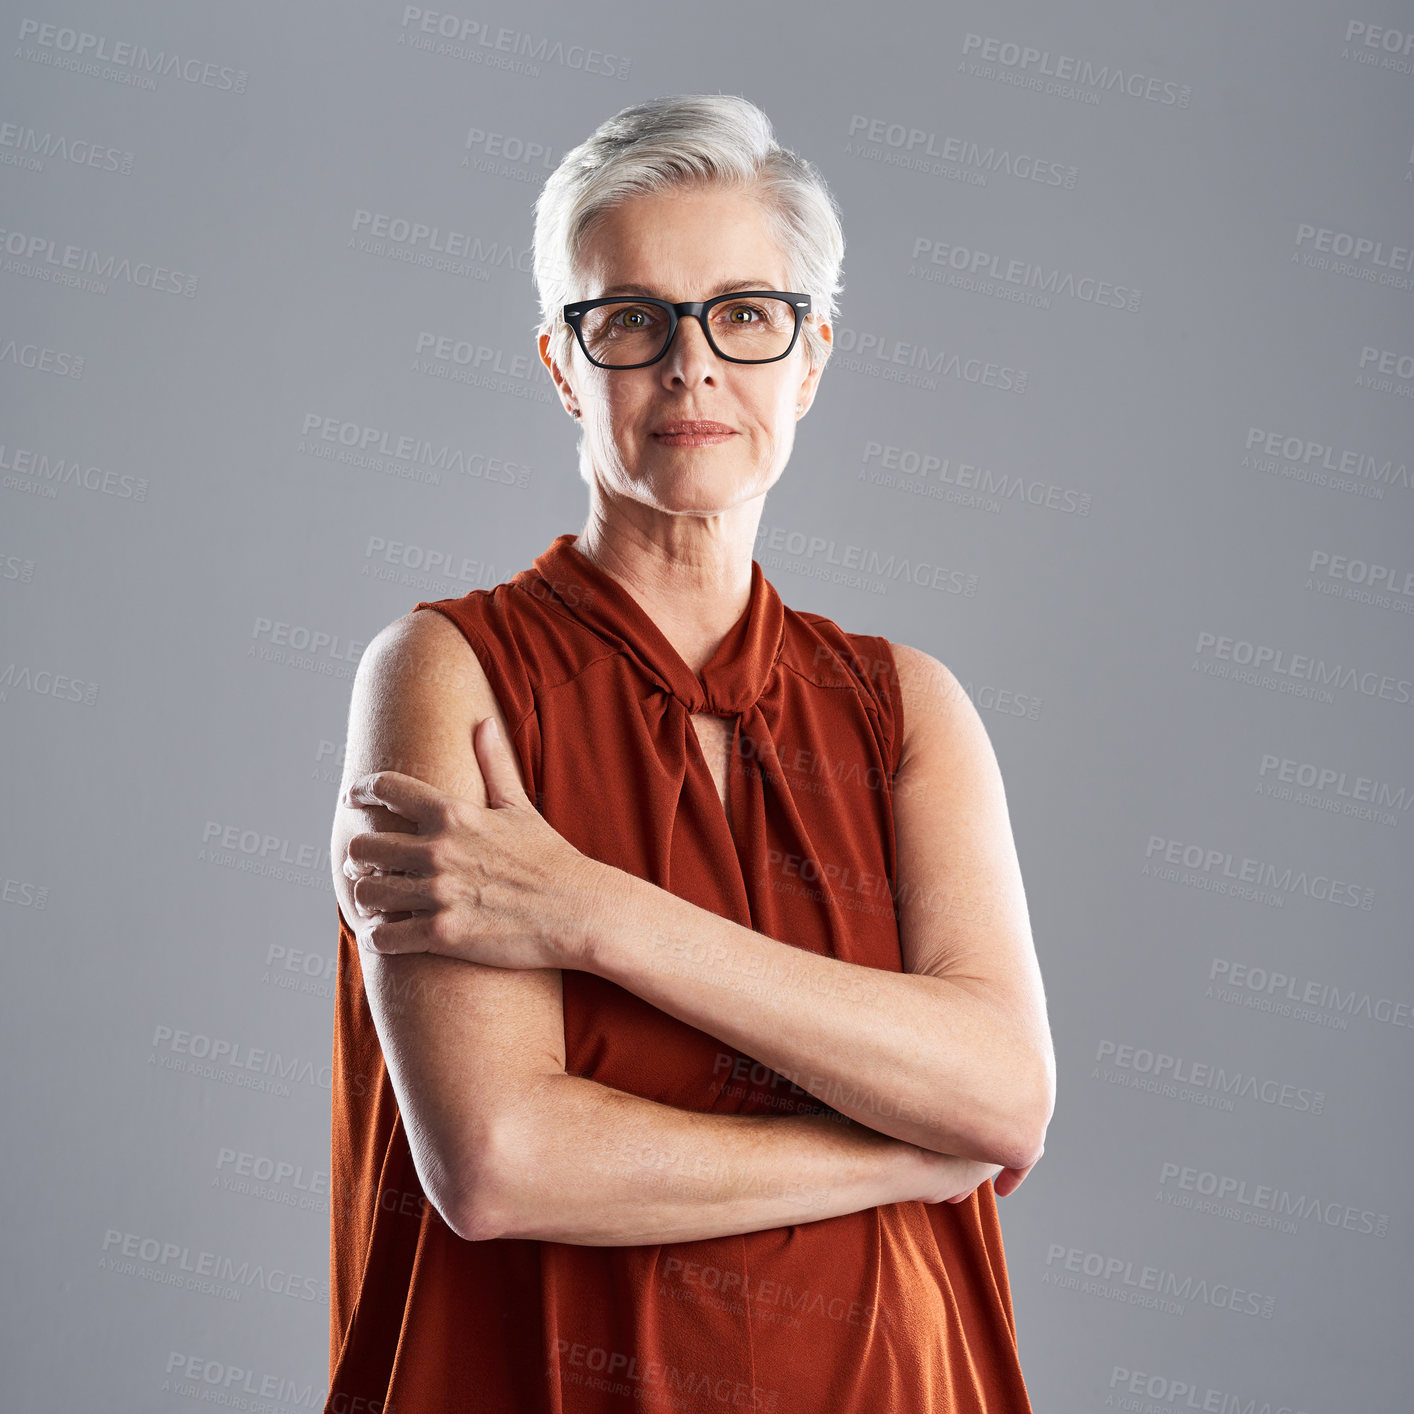 Buy stock photo Portrait of an attractive mature businesswoman posing with her arms folded against a grey background